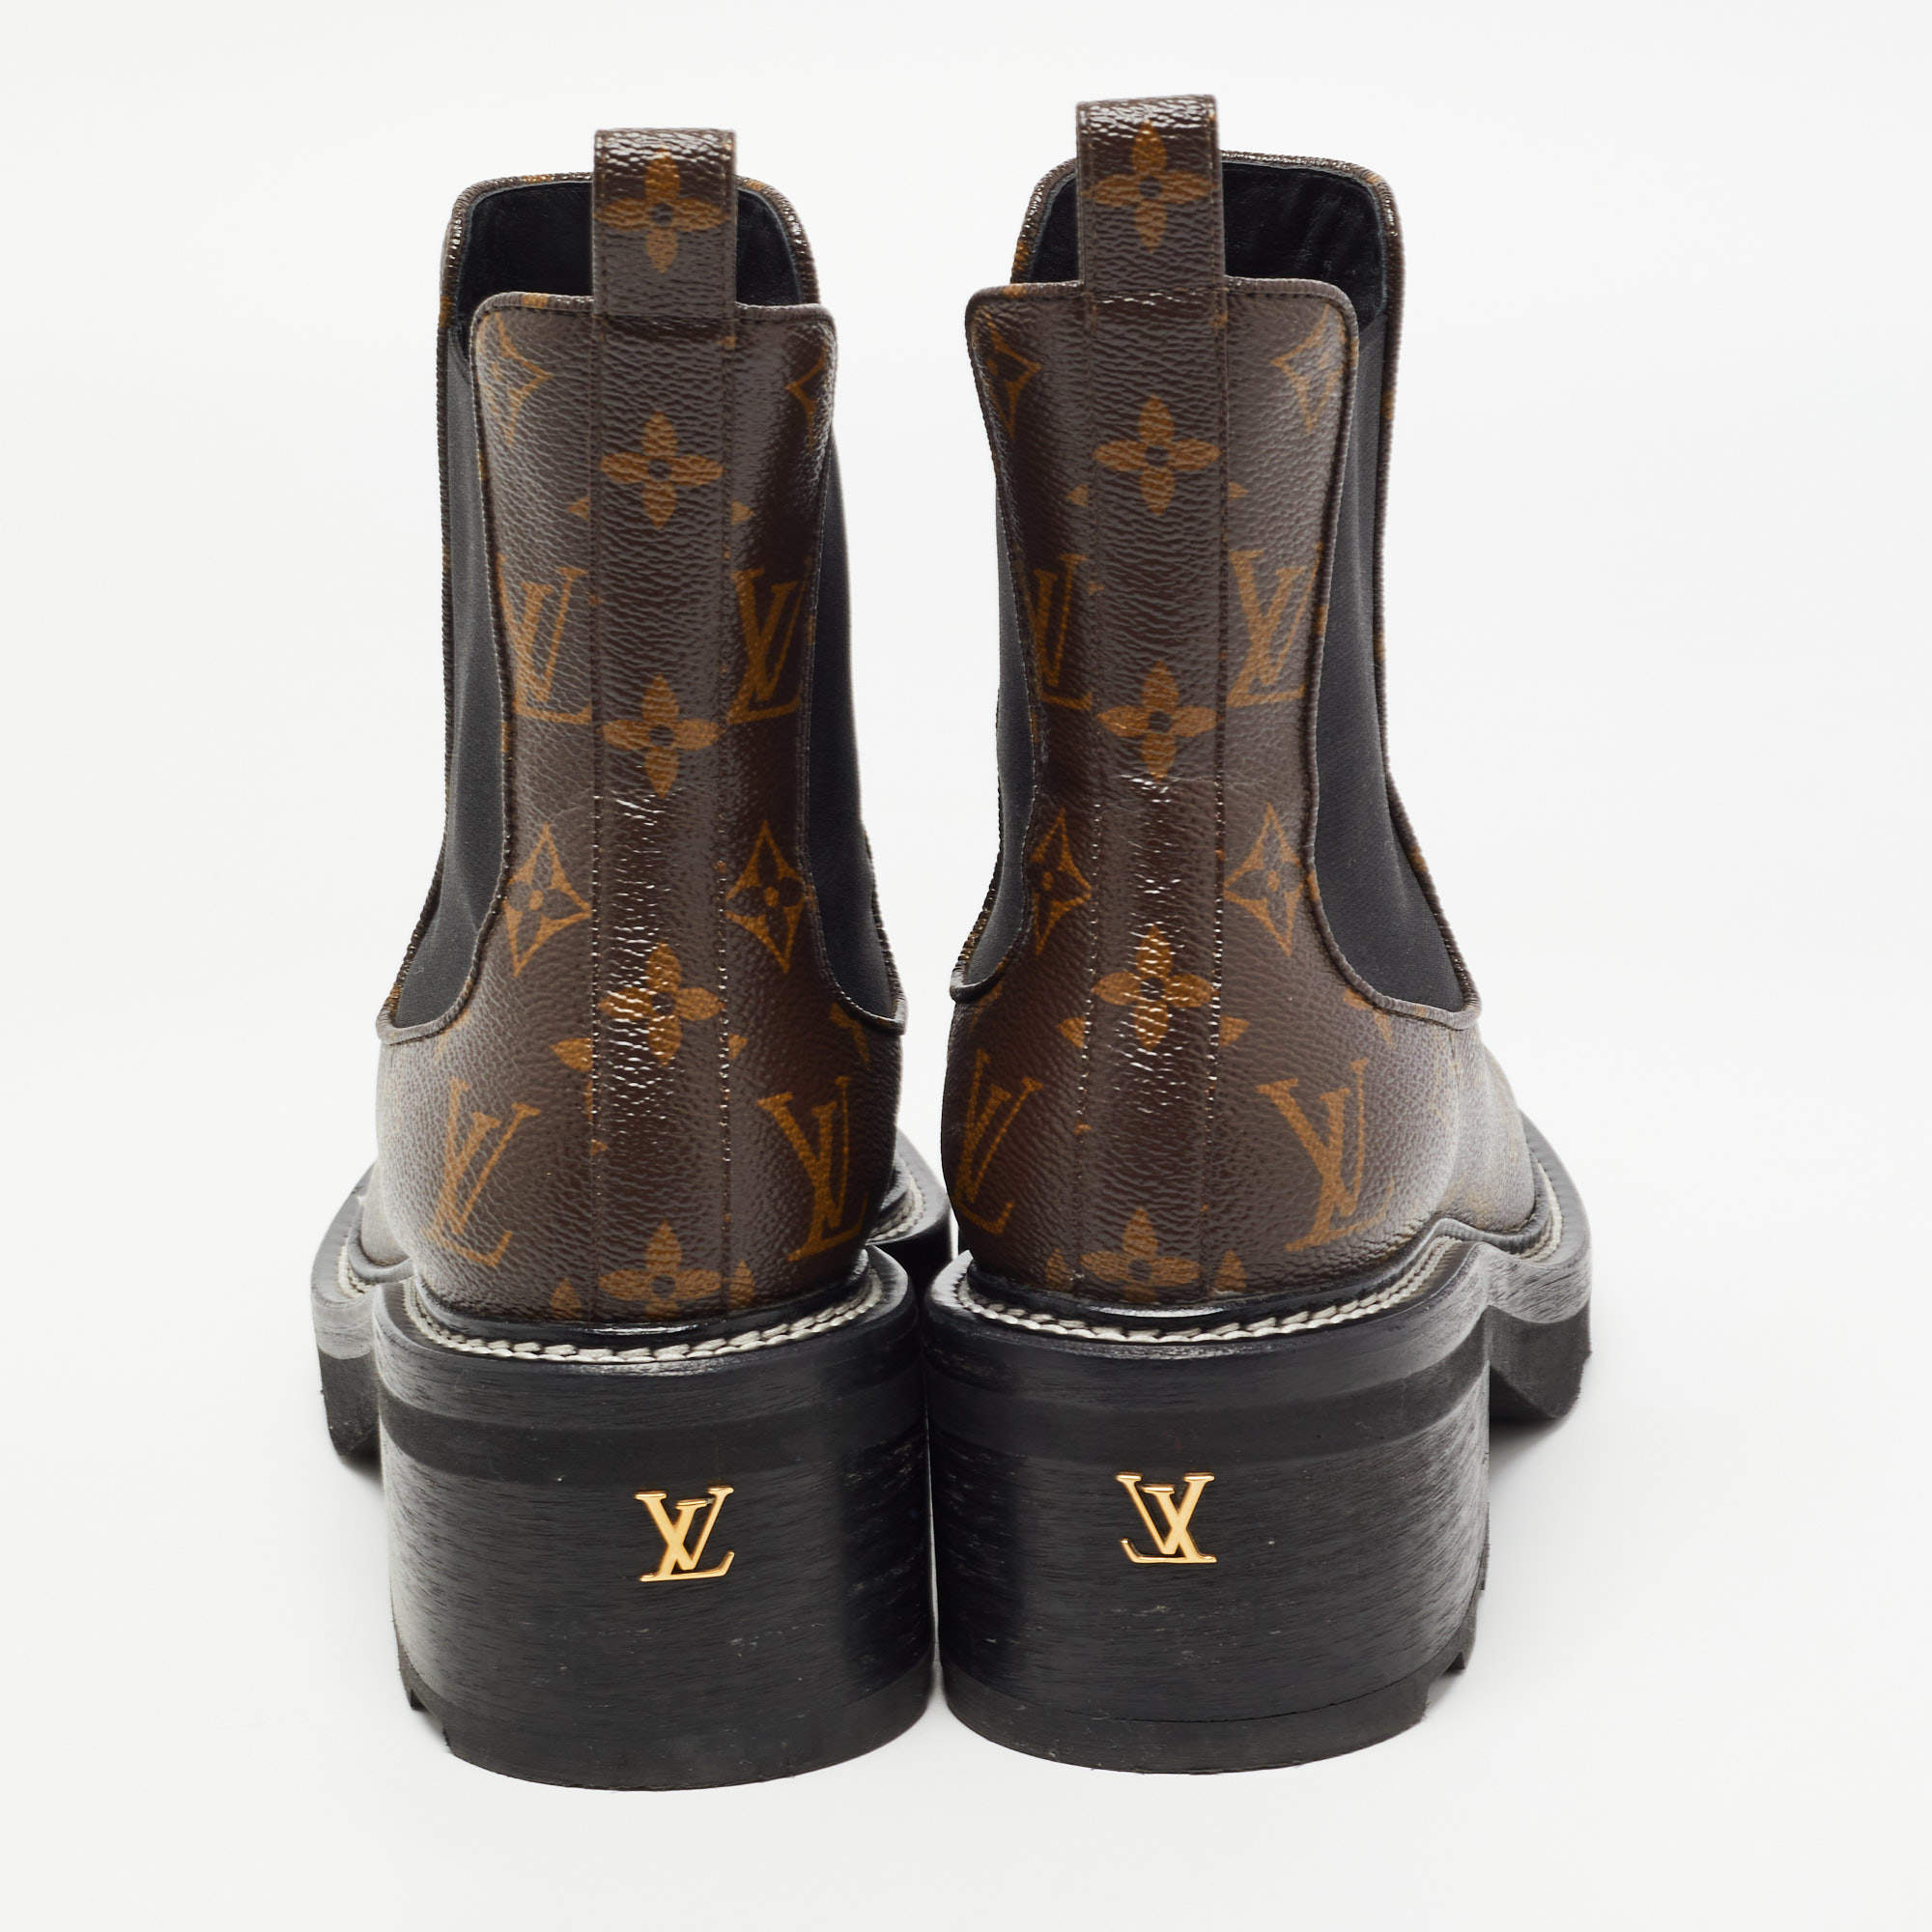 Lv beaubourg leather ankle boots Louis Vuitton Brown size 41 EU in Leather  - 36188608